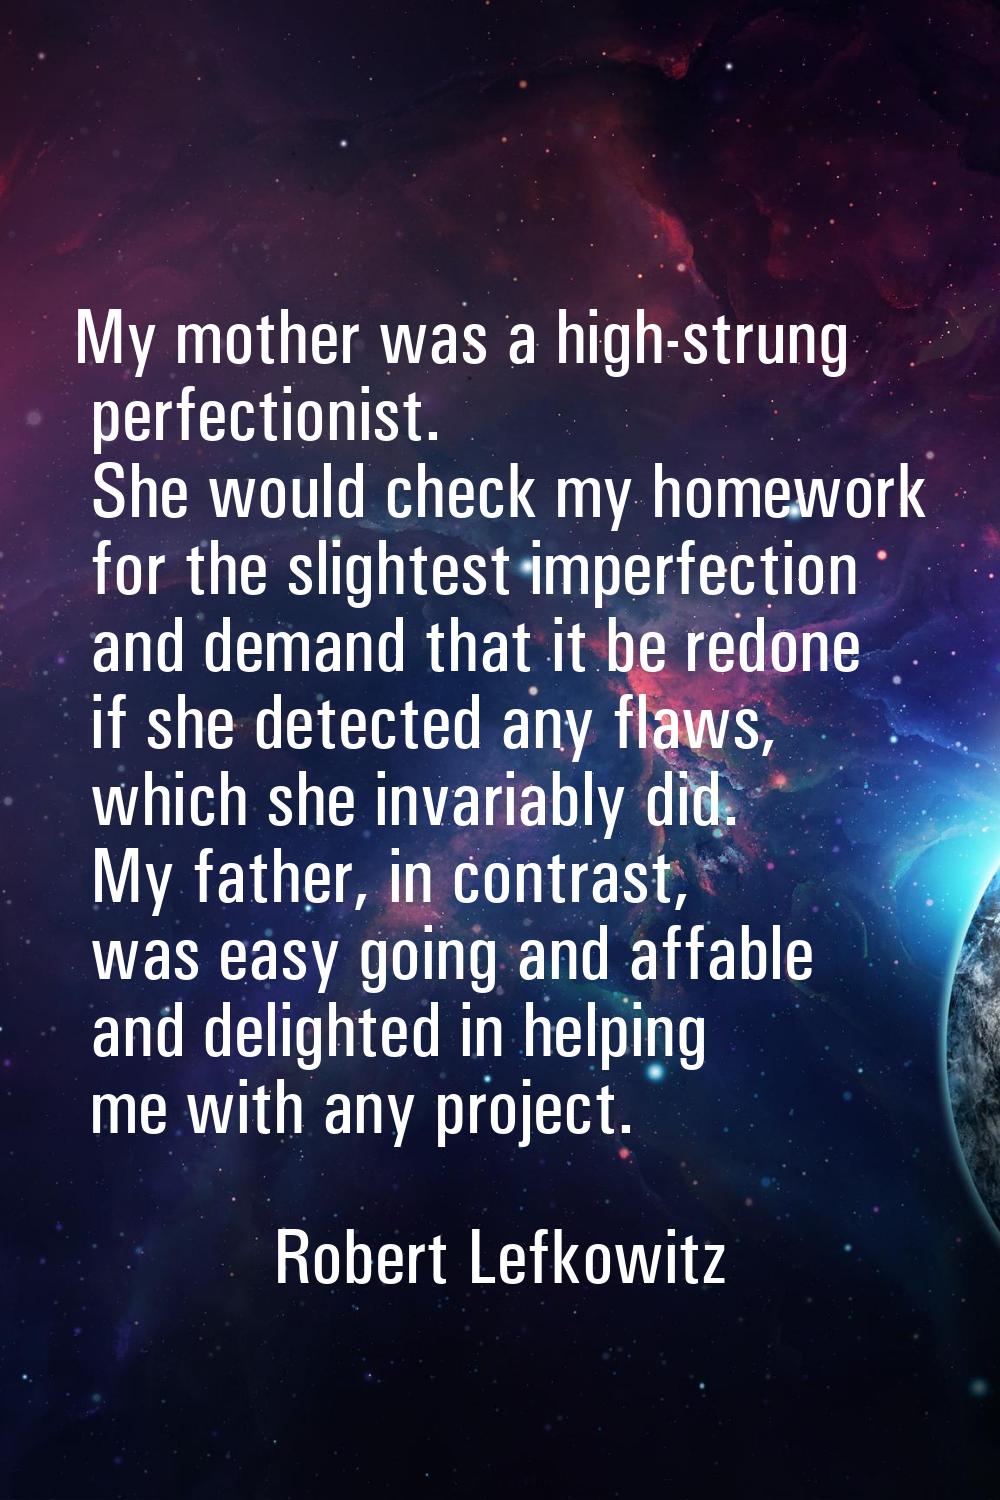 My mother was a high-strung perfectionist. She would check my homework for the slightest imperfecti